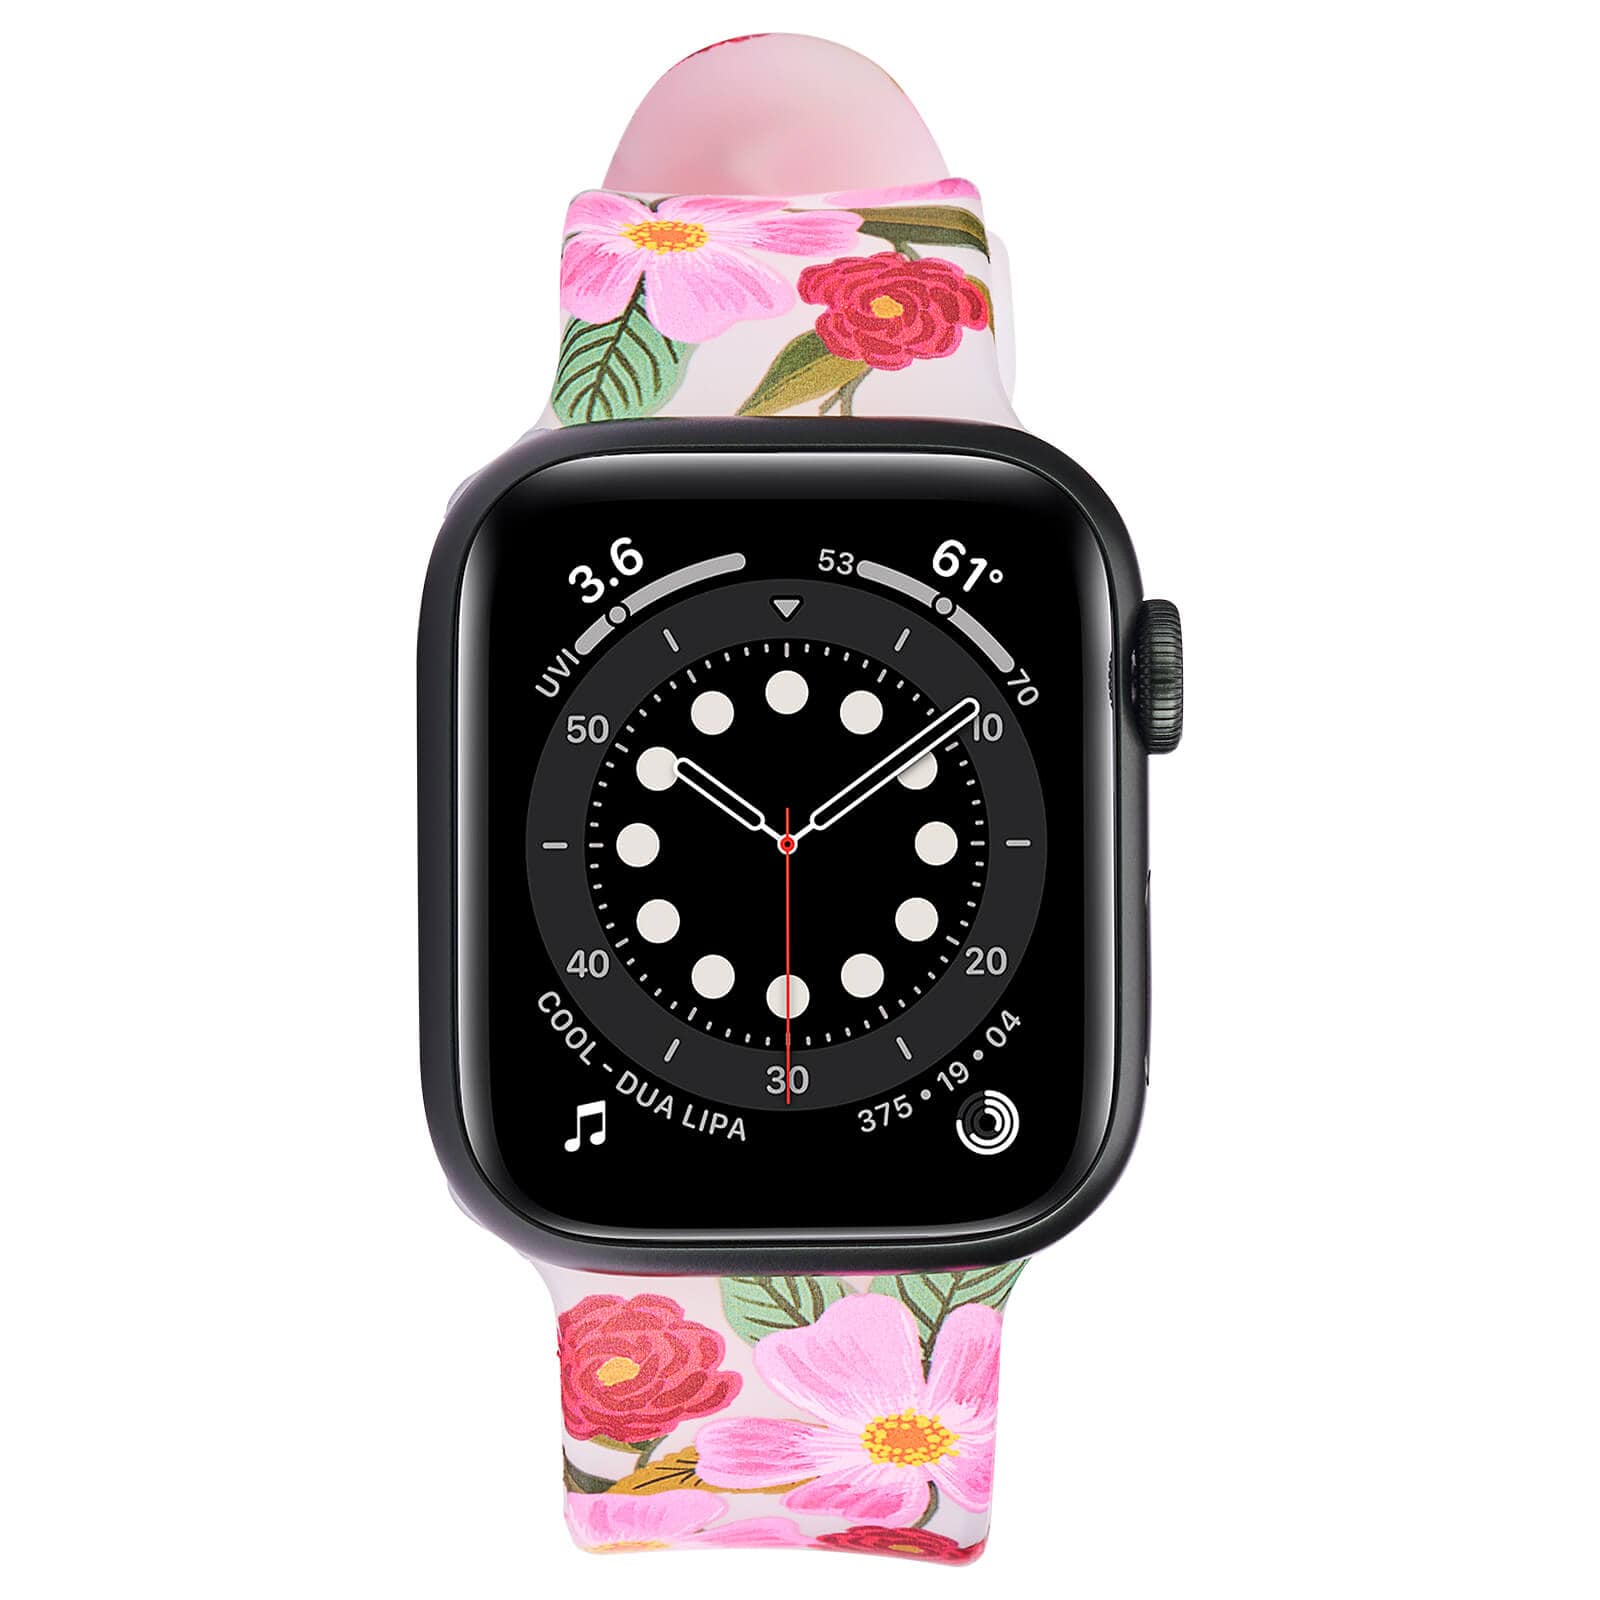 Floral watch band. color::Rose Garden